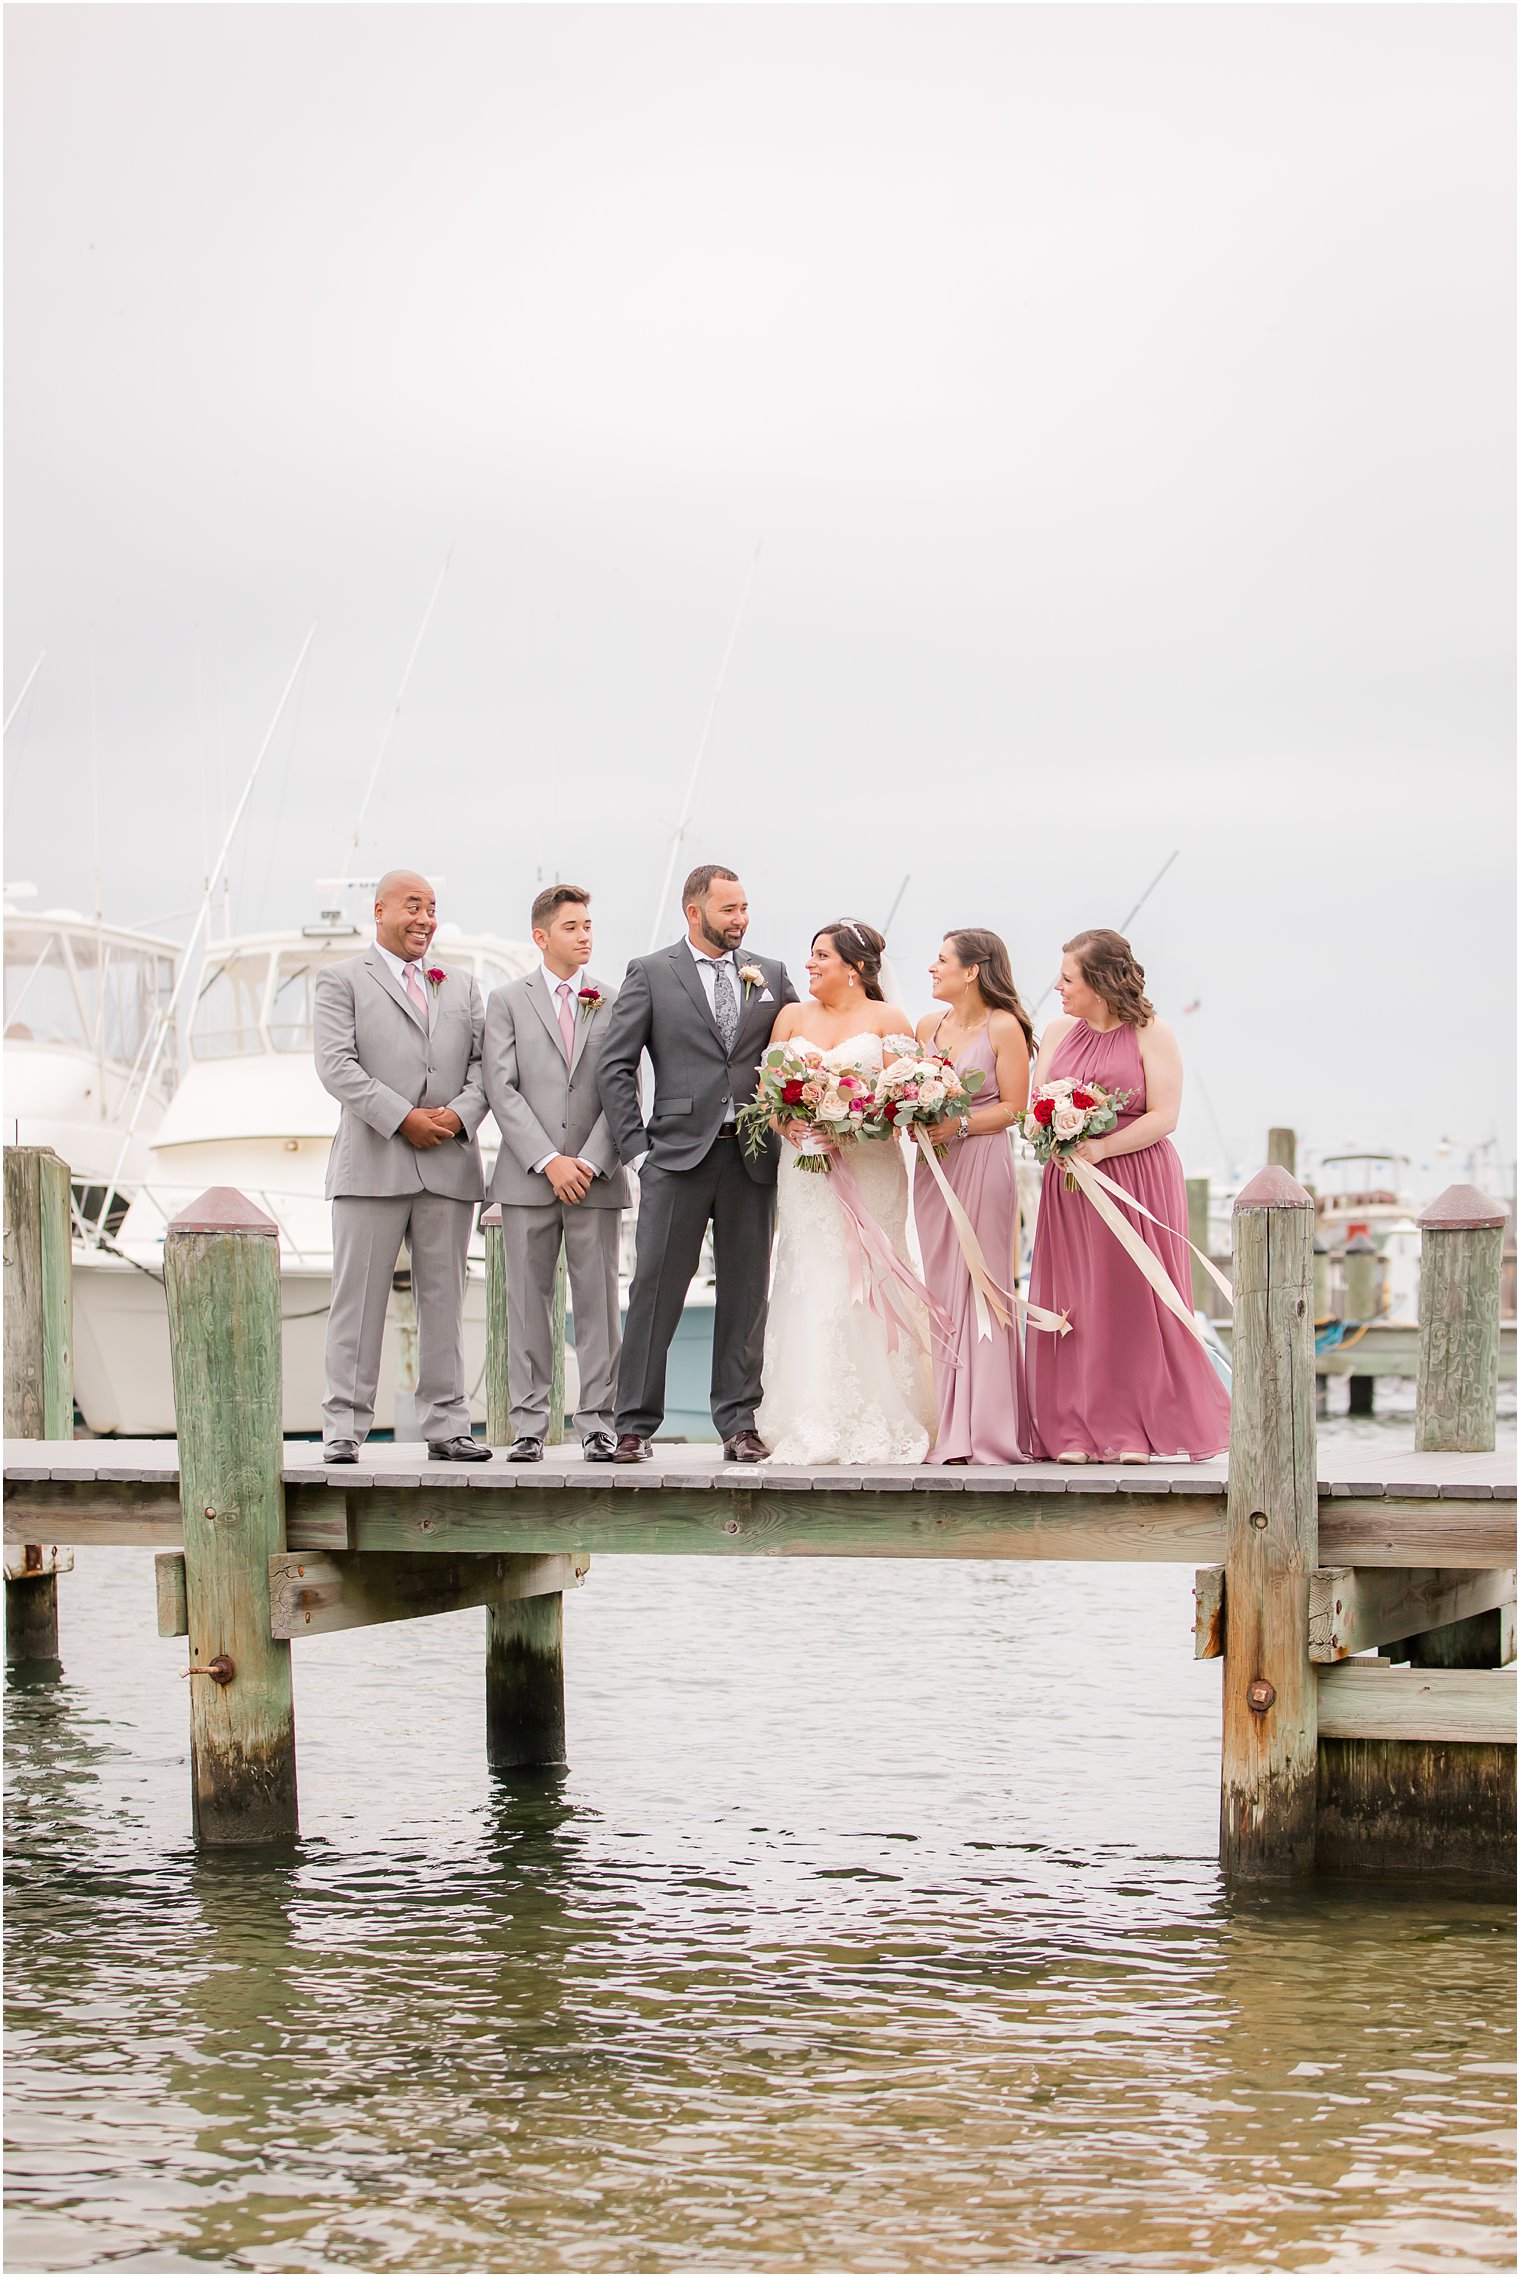 Wedding party at Clarks Landing Yacht Club